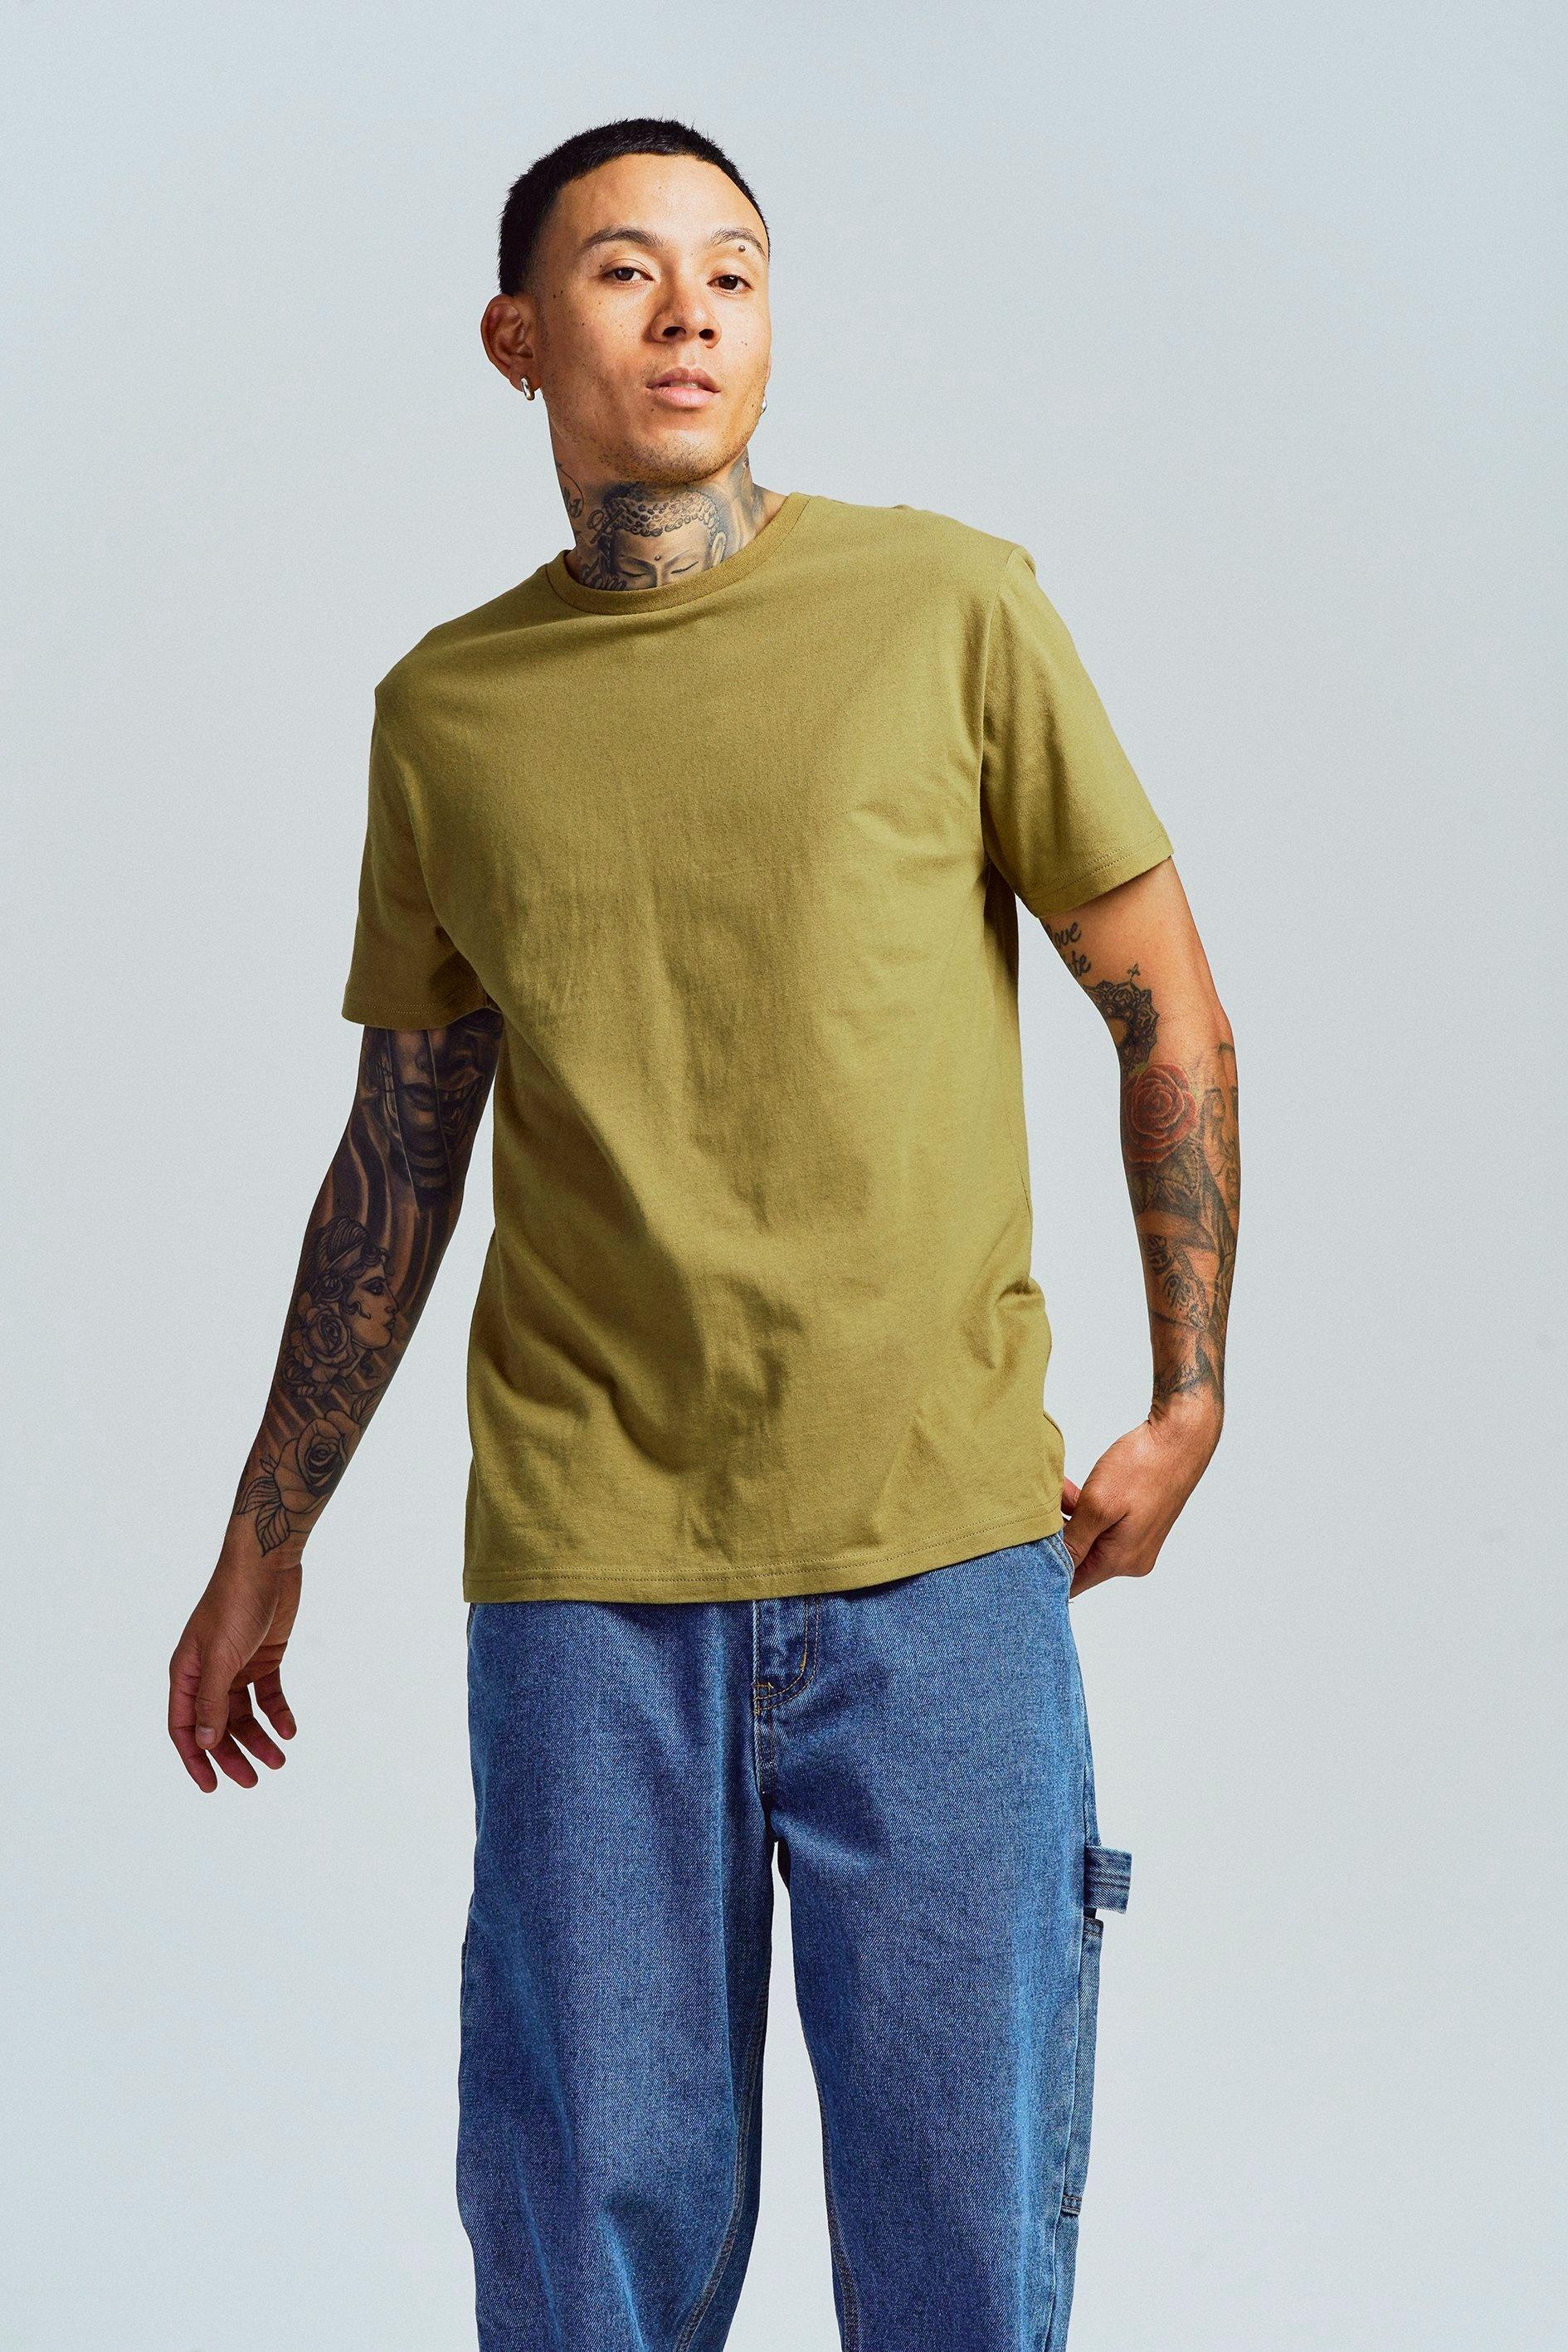 Mr Price | Men's casual t-shirt | Crew, turtle neck and regular fit t-shirt | Africa